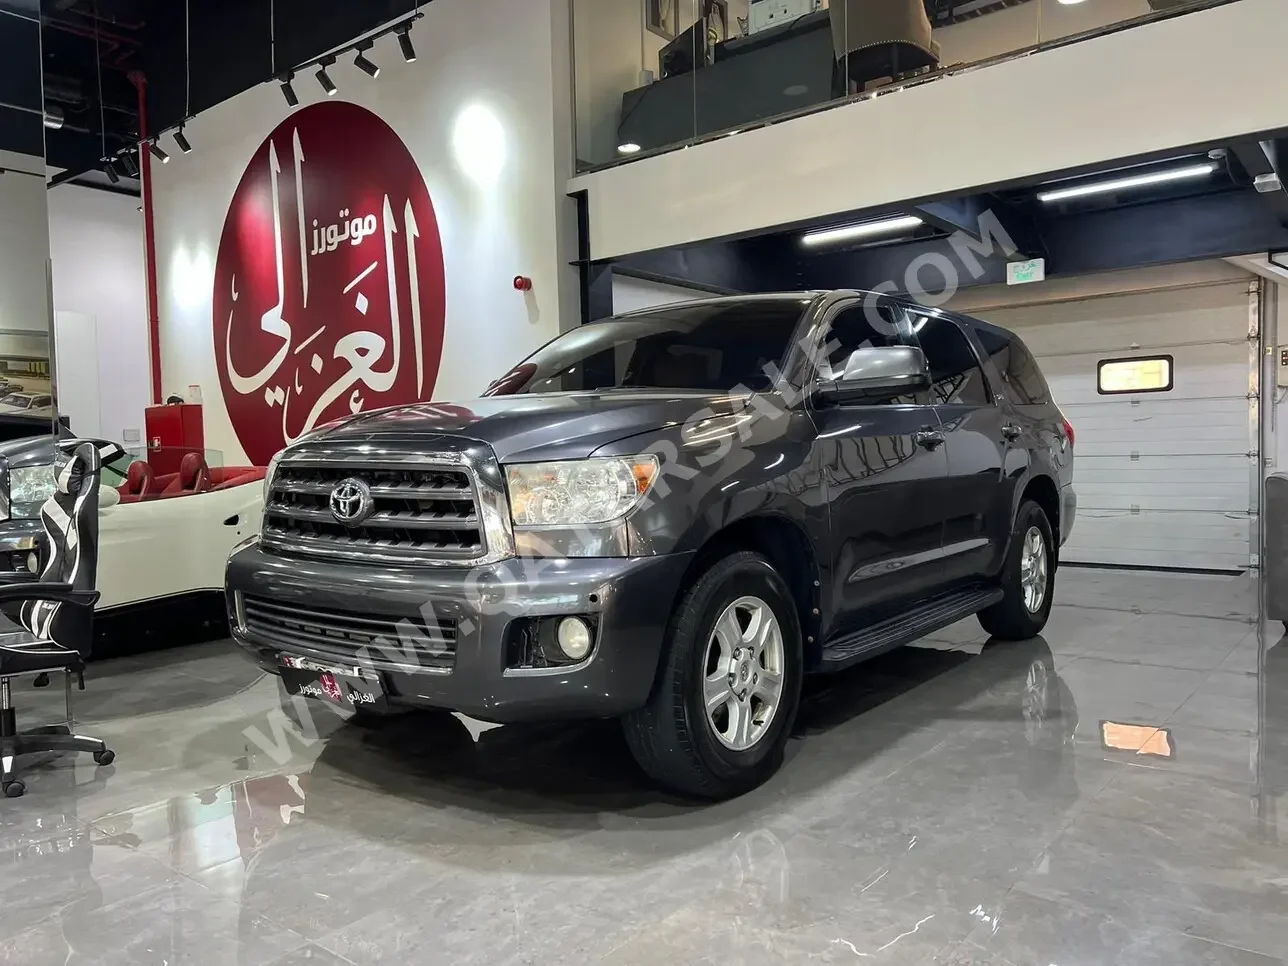  Toyota  Sequoia  2015  Automatic  256,000 Km  8 Cylinder  Four Wheel Drive (4WD)  SUV  Gray  With Warranty